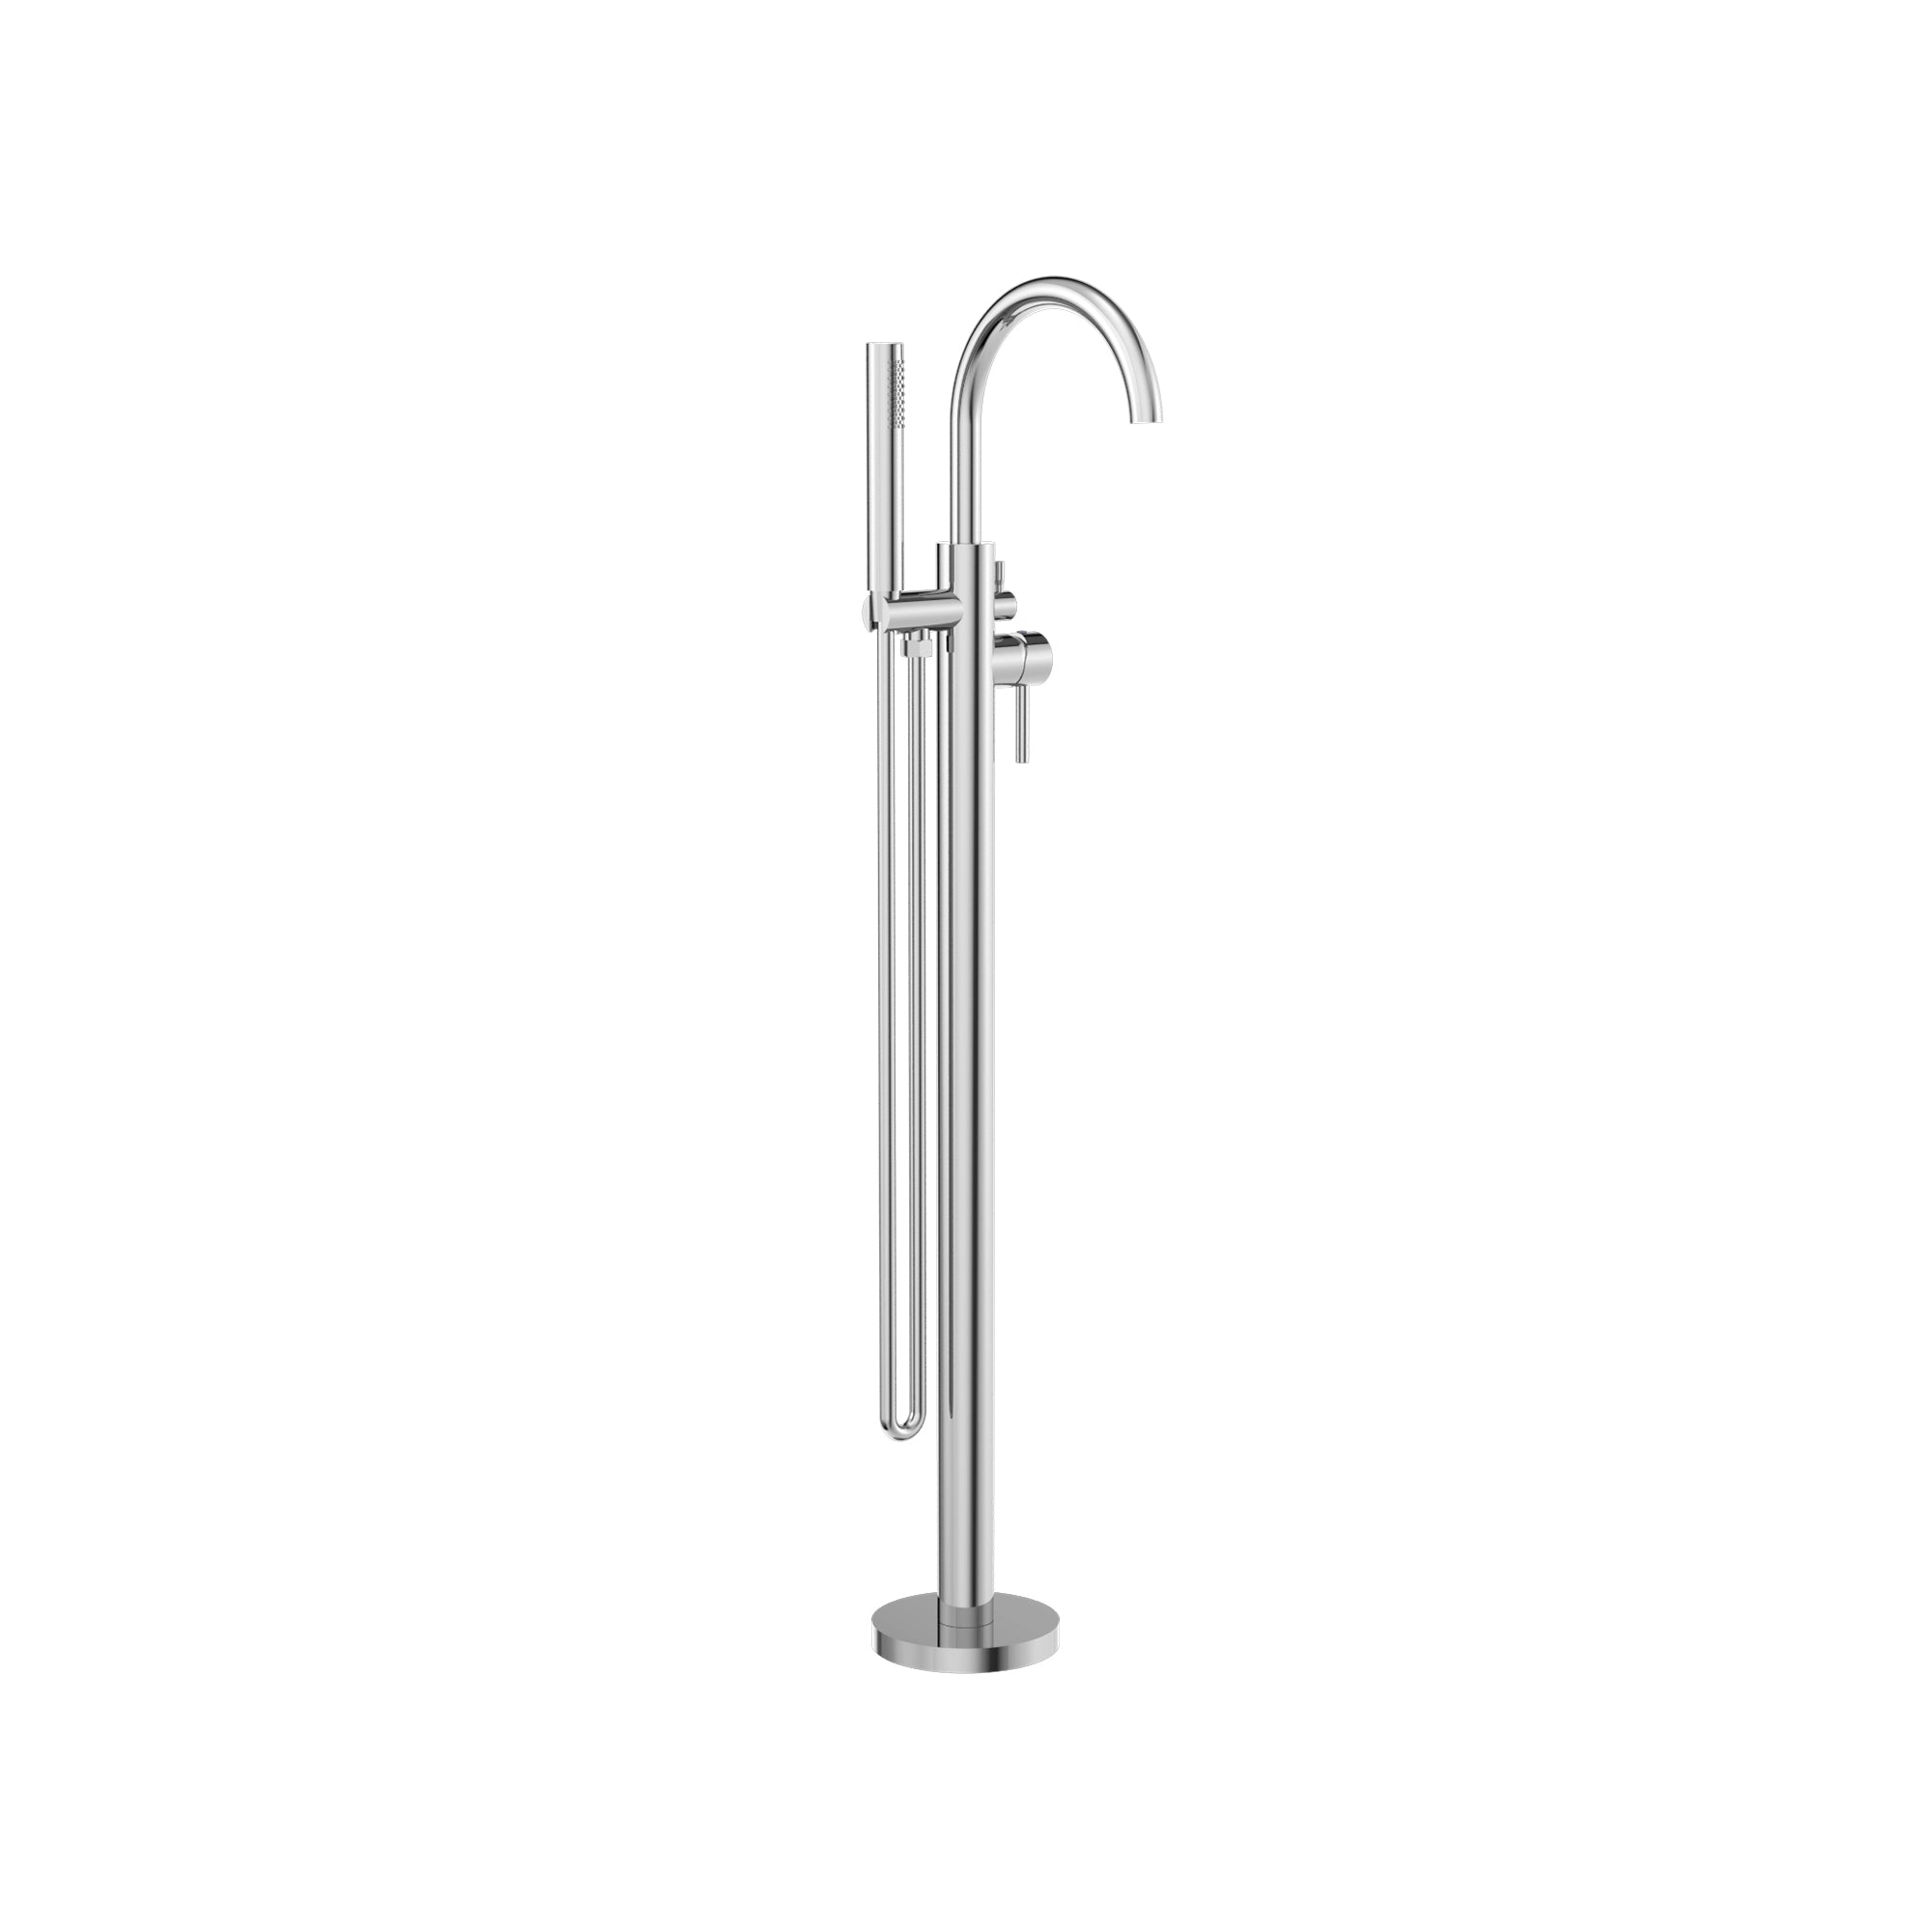 Mecca Round Freestanding Mixer With Hand Shower Chrome - NR210903aCH